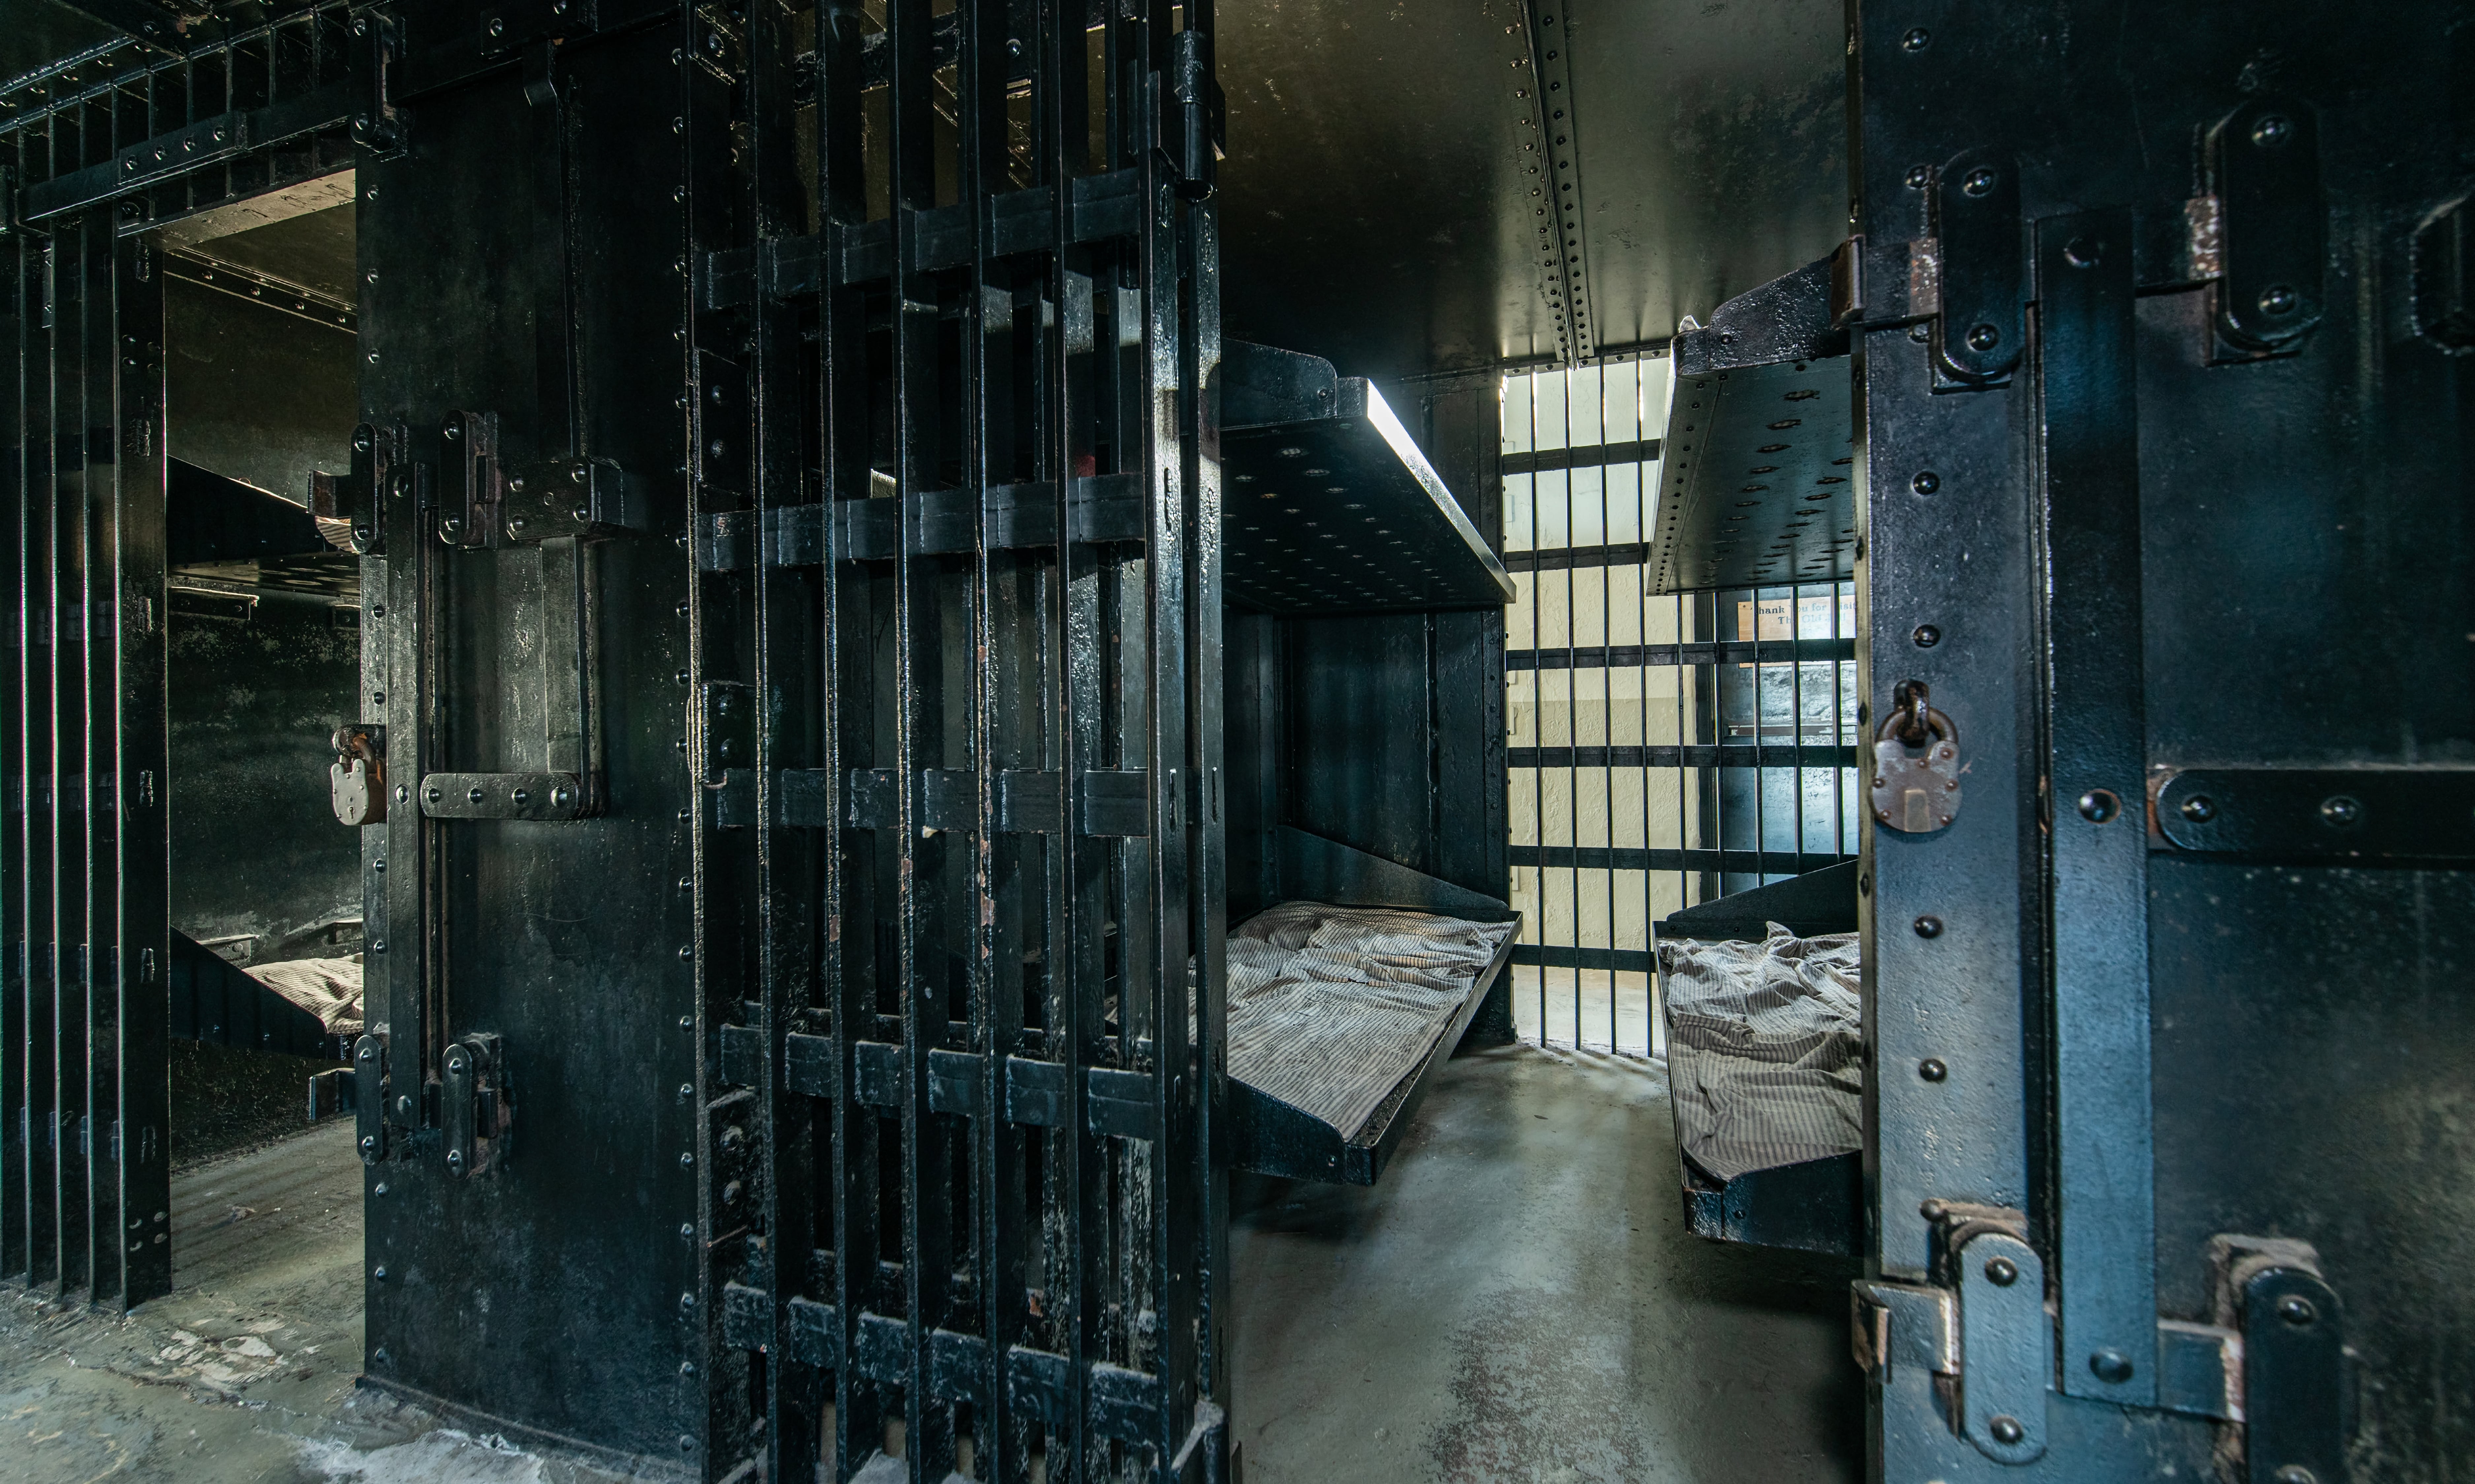 Cramped metal cells in the St. Augustine Old Jail show harsh conditions and cold interiors